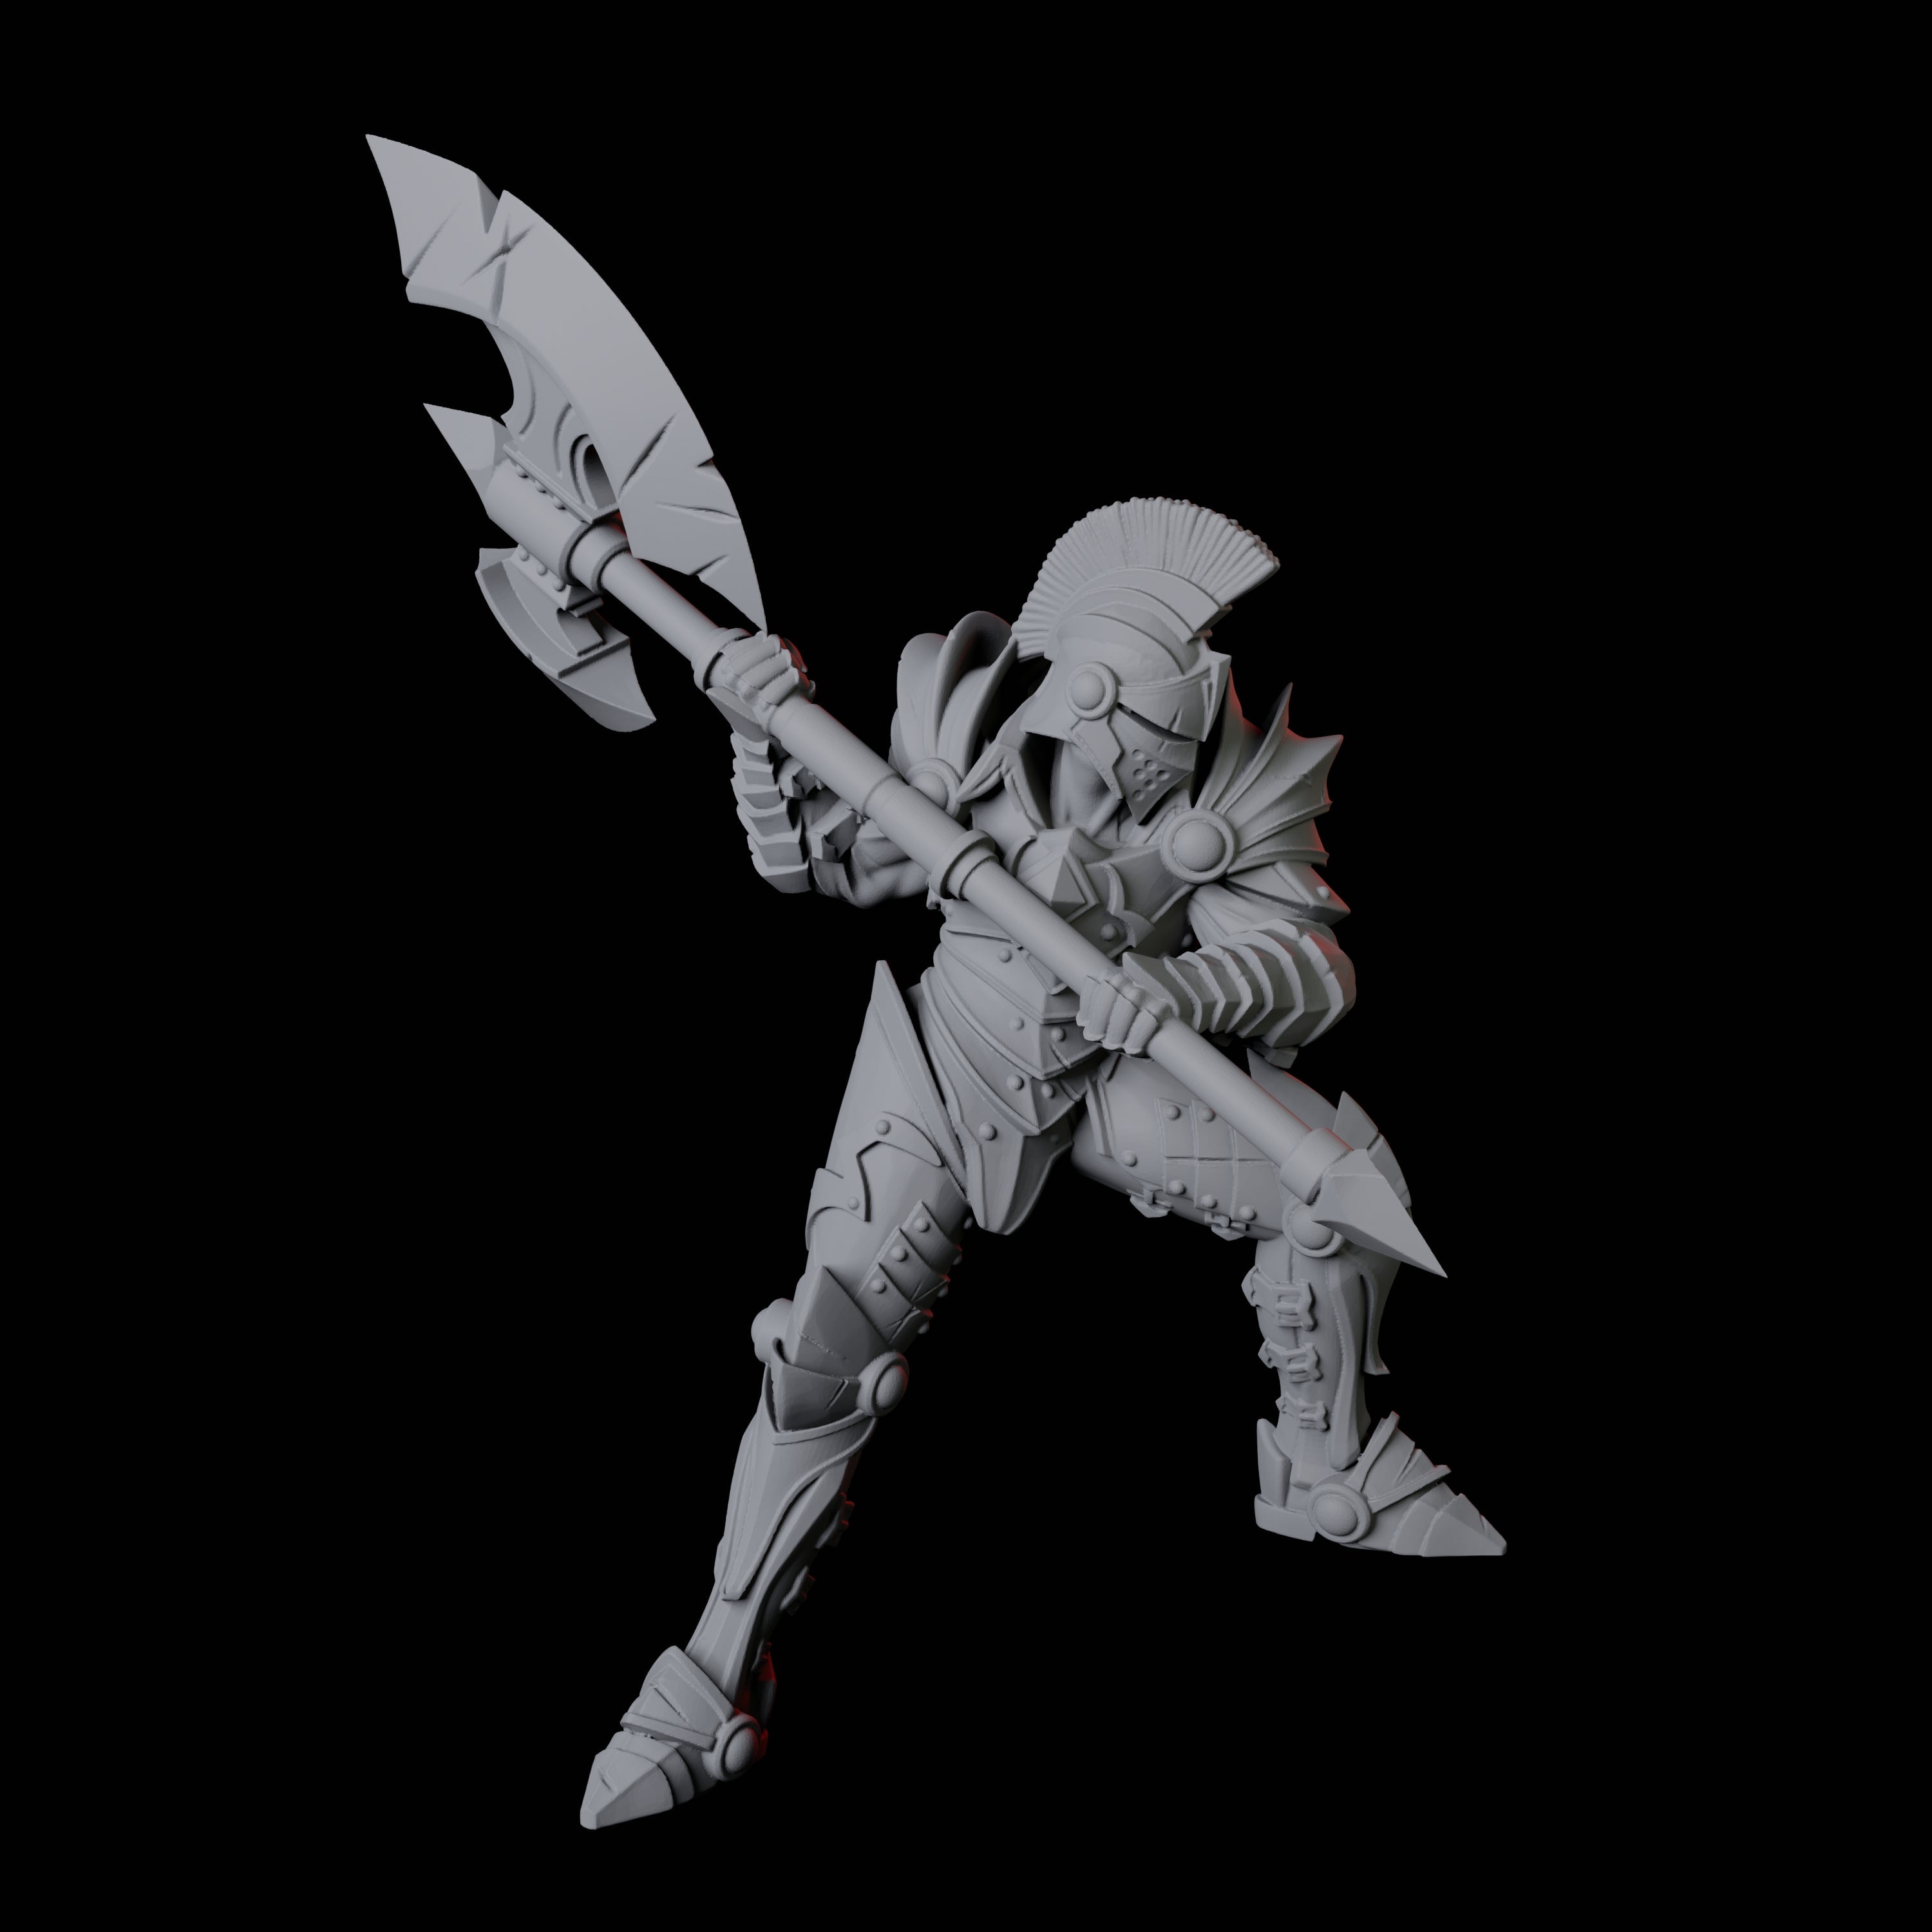 Three Axe-Wielding Knights Miniature for Dungeons and Dragons, Pathfinder or other TTRPGs